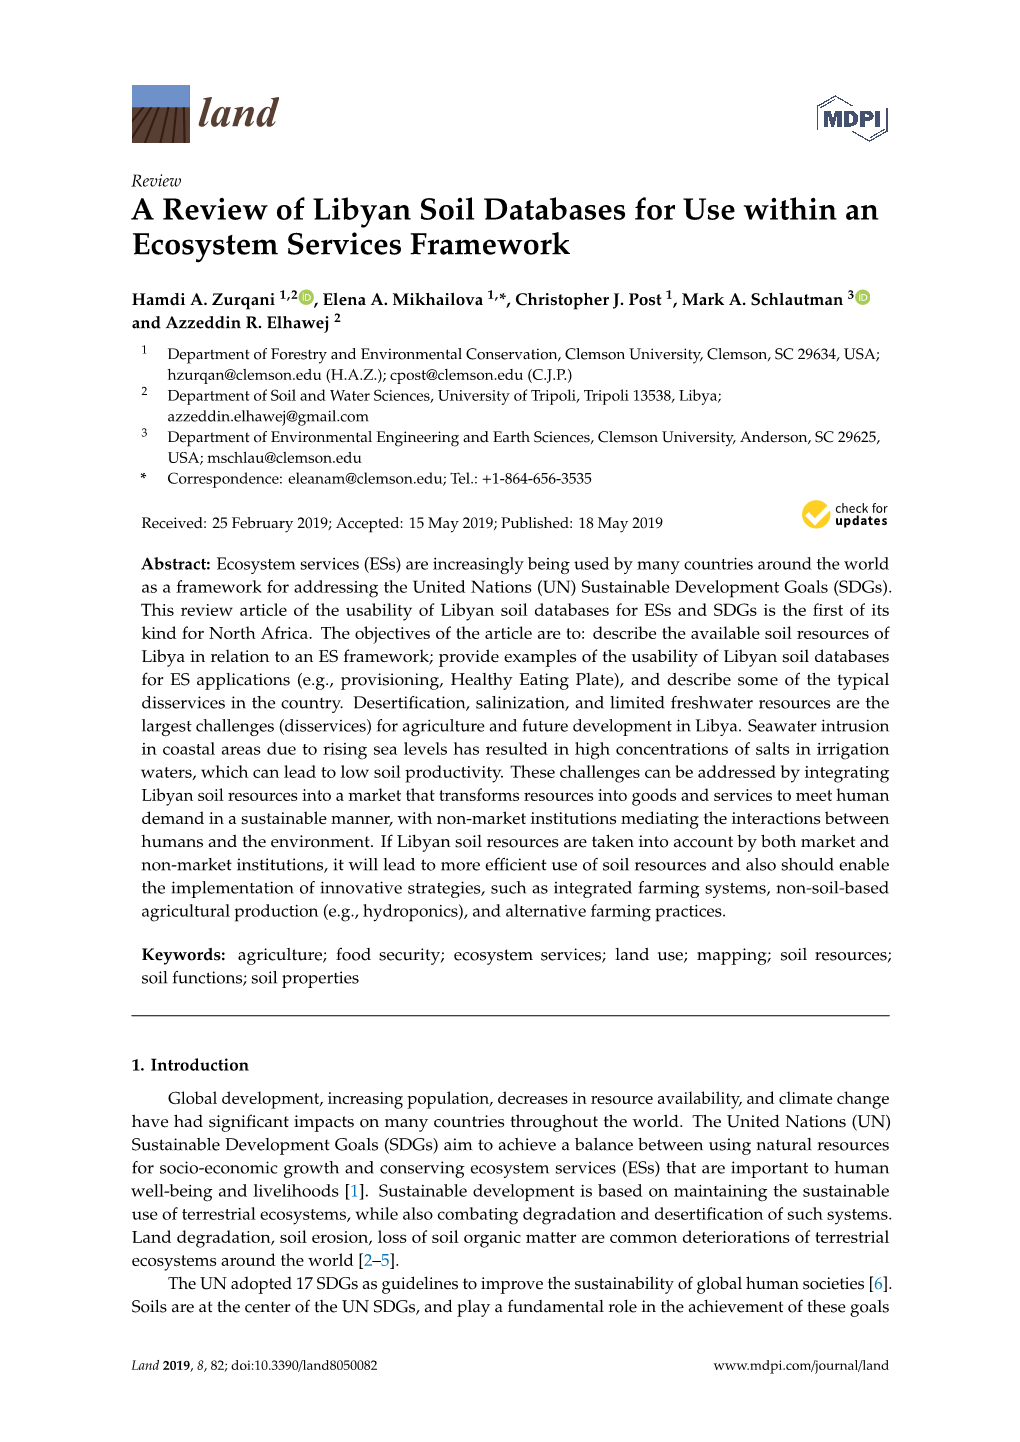 A Review of Libyan Soil Databases for Use Within an Ecosystem Services Framework